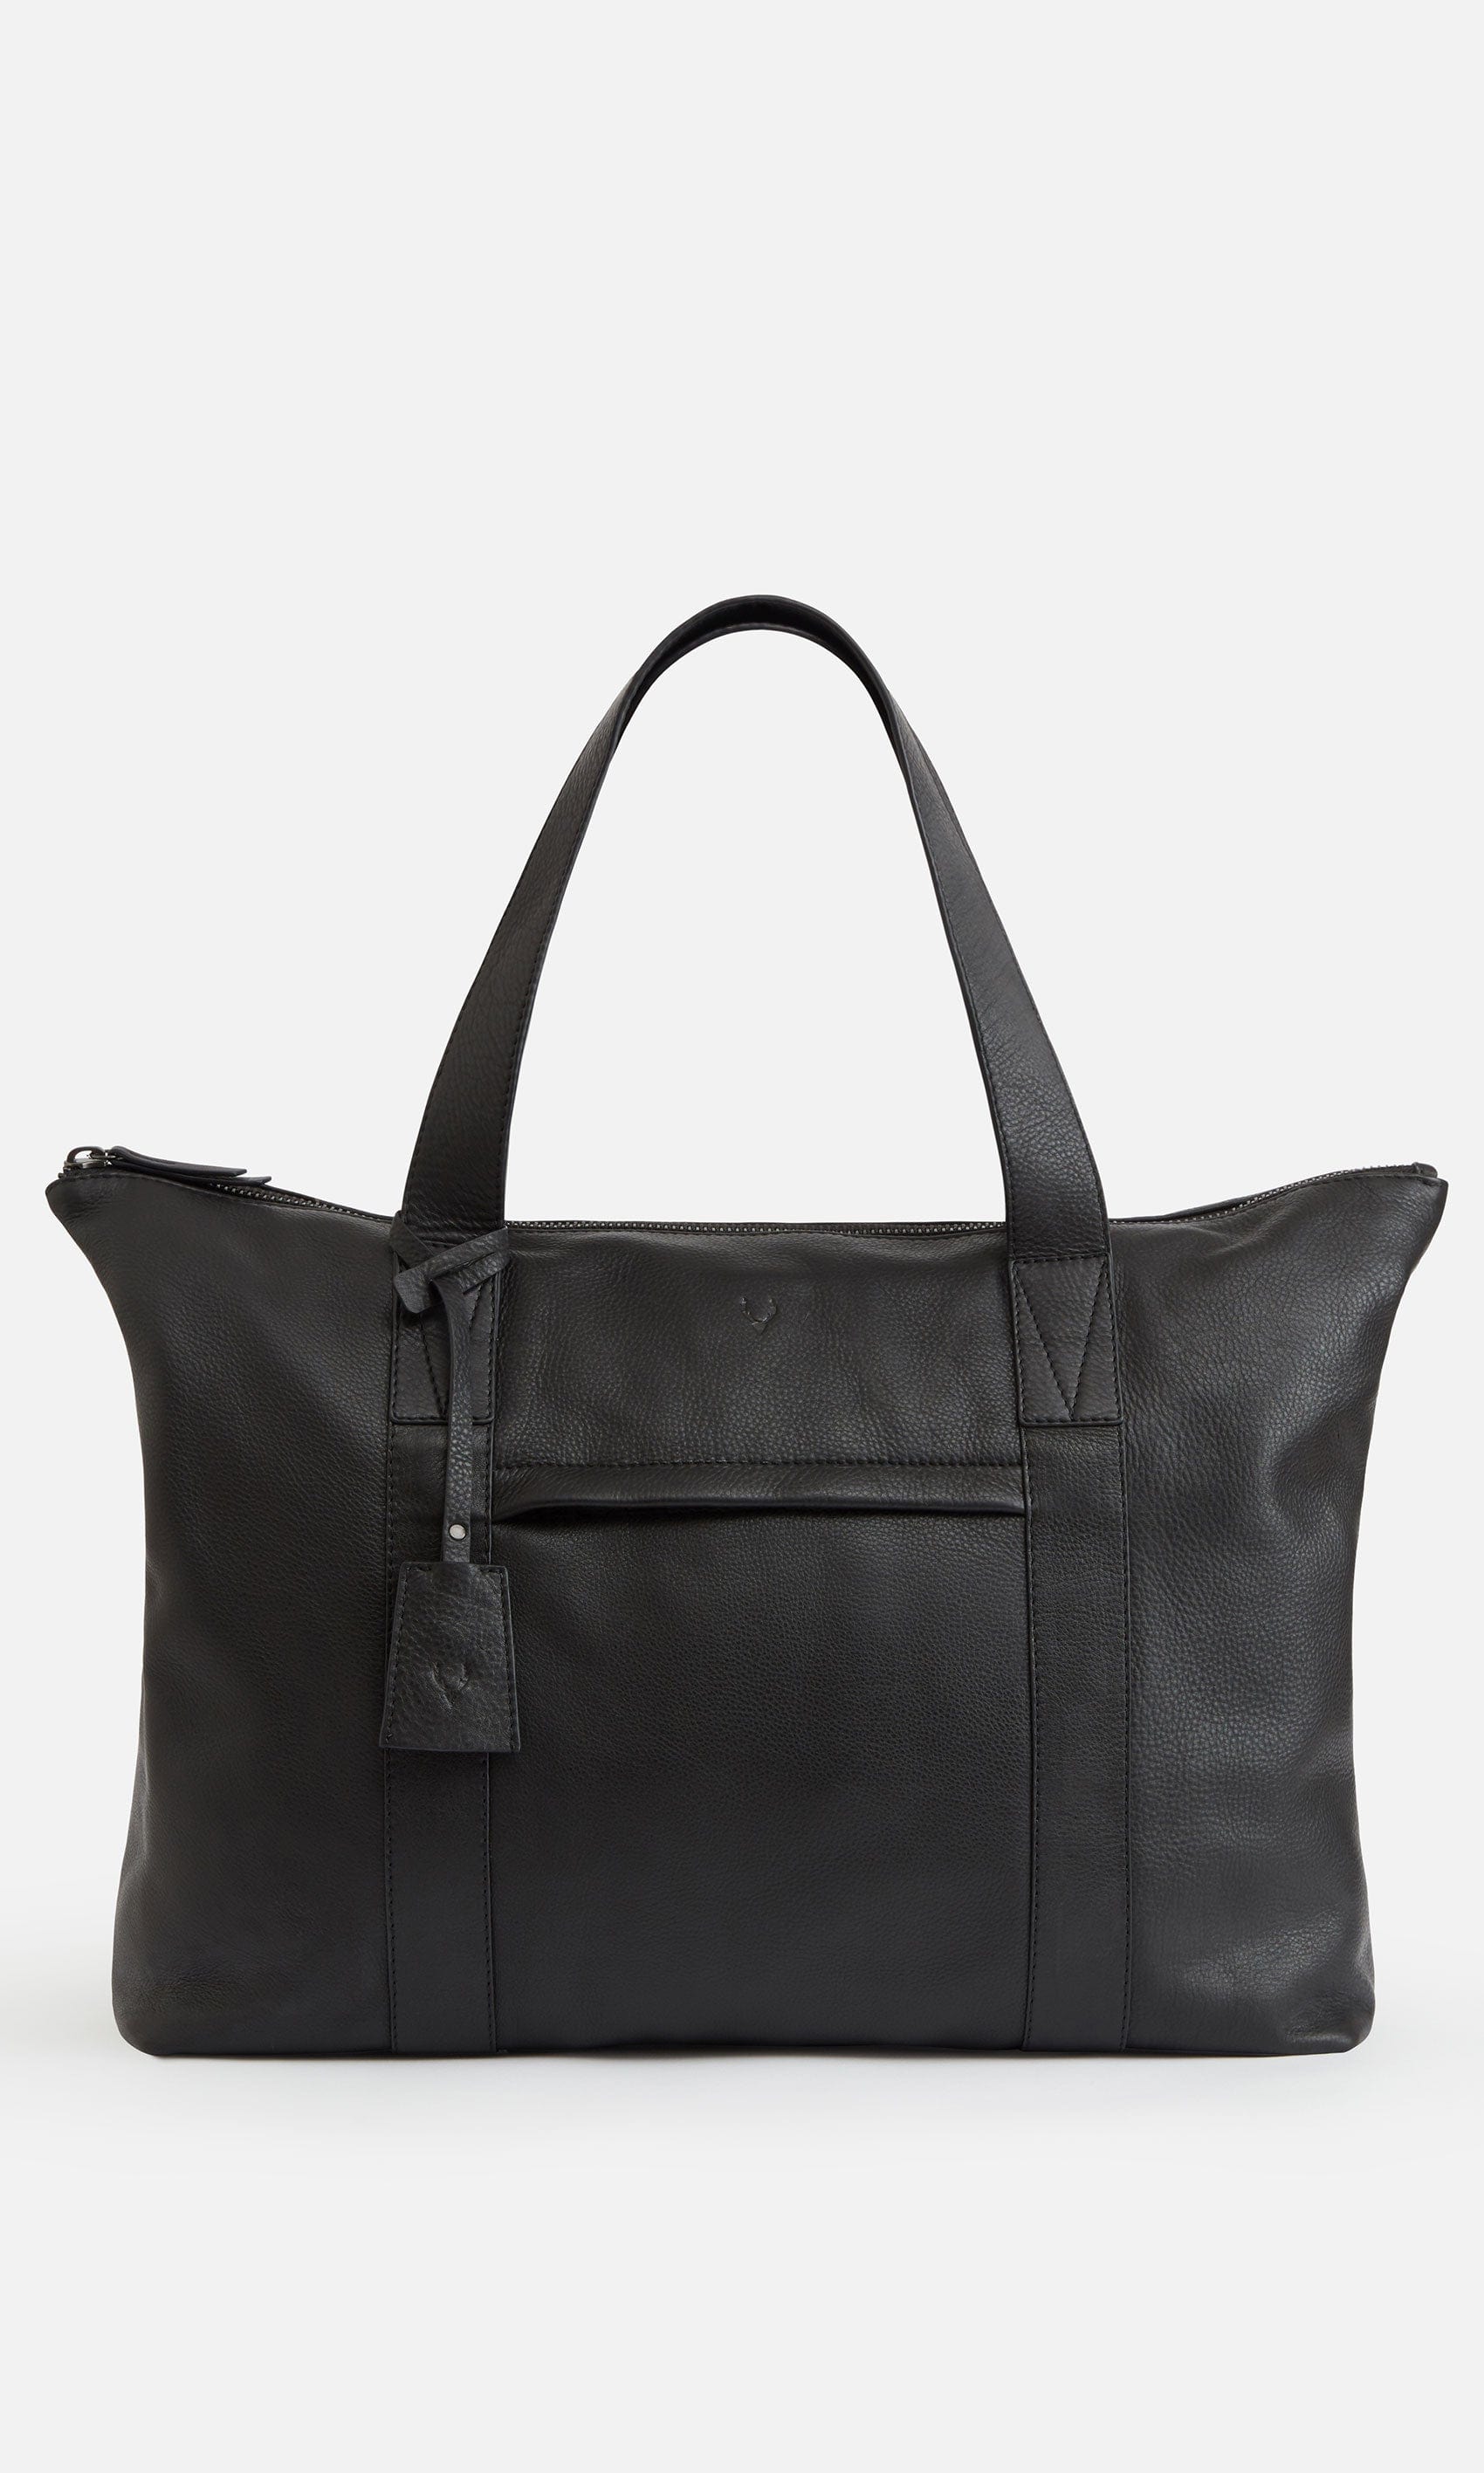 View Antler Brompton Leather Oversized Laptop Tote In Black Size 55 x 365 x 14 cm information